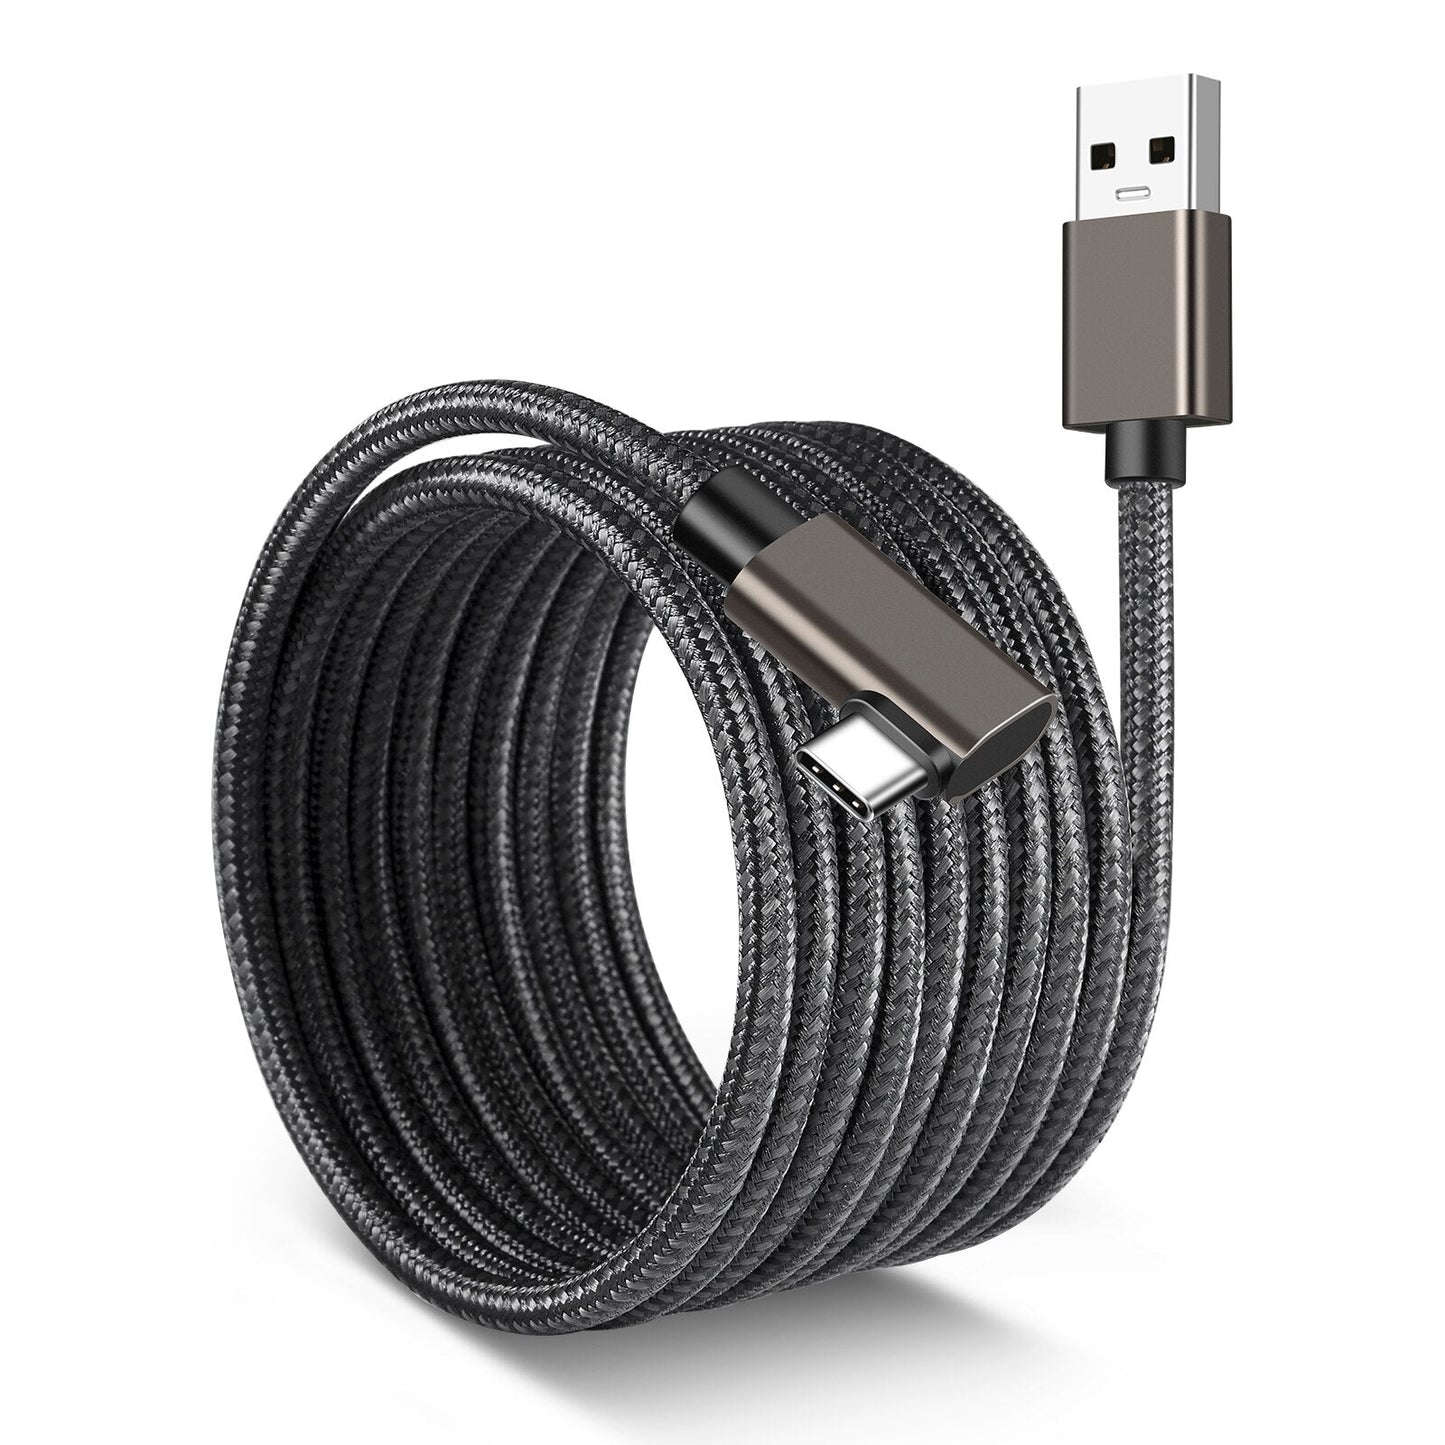 Oculus Quest 2 Link Cable 16FT, VR Headset Cable For Quest 1, USB 3.0 Type C To C High Speed Data Transfer Charging Cord